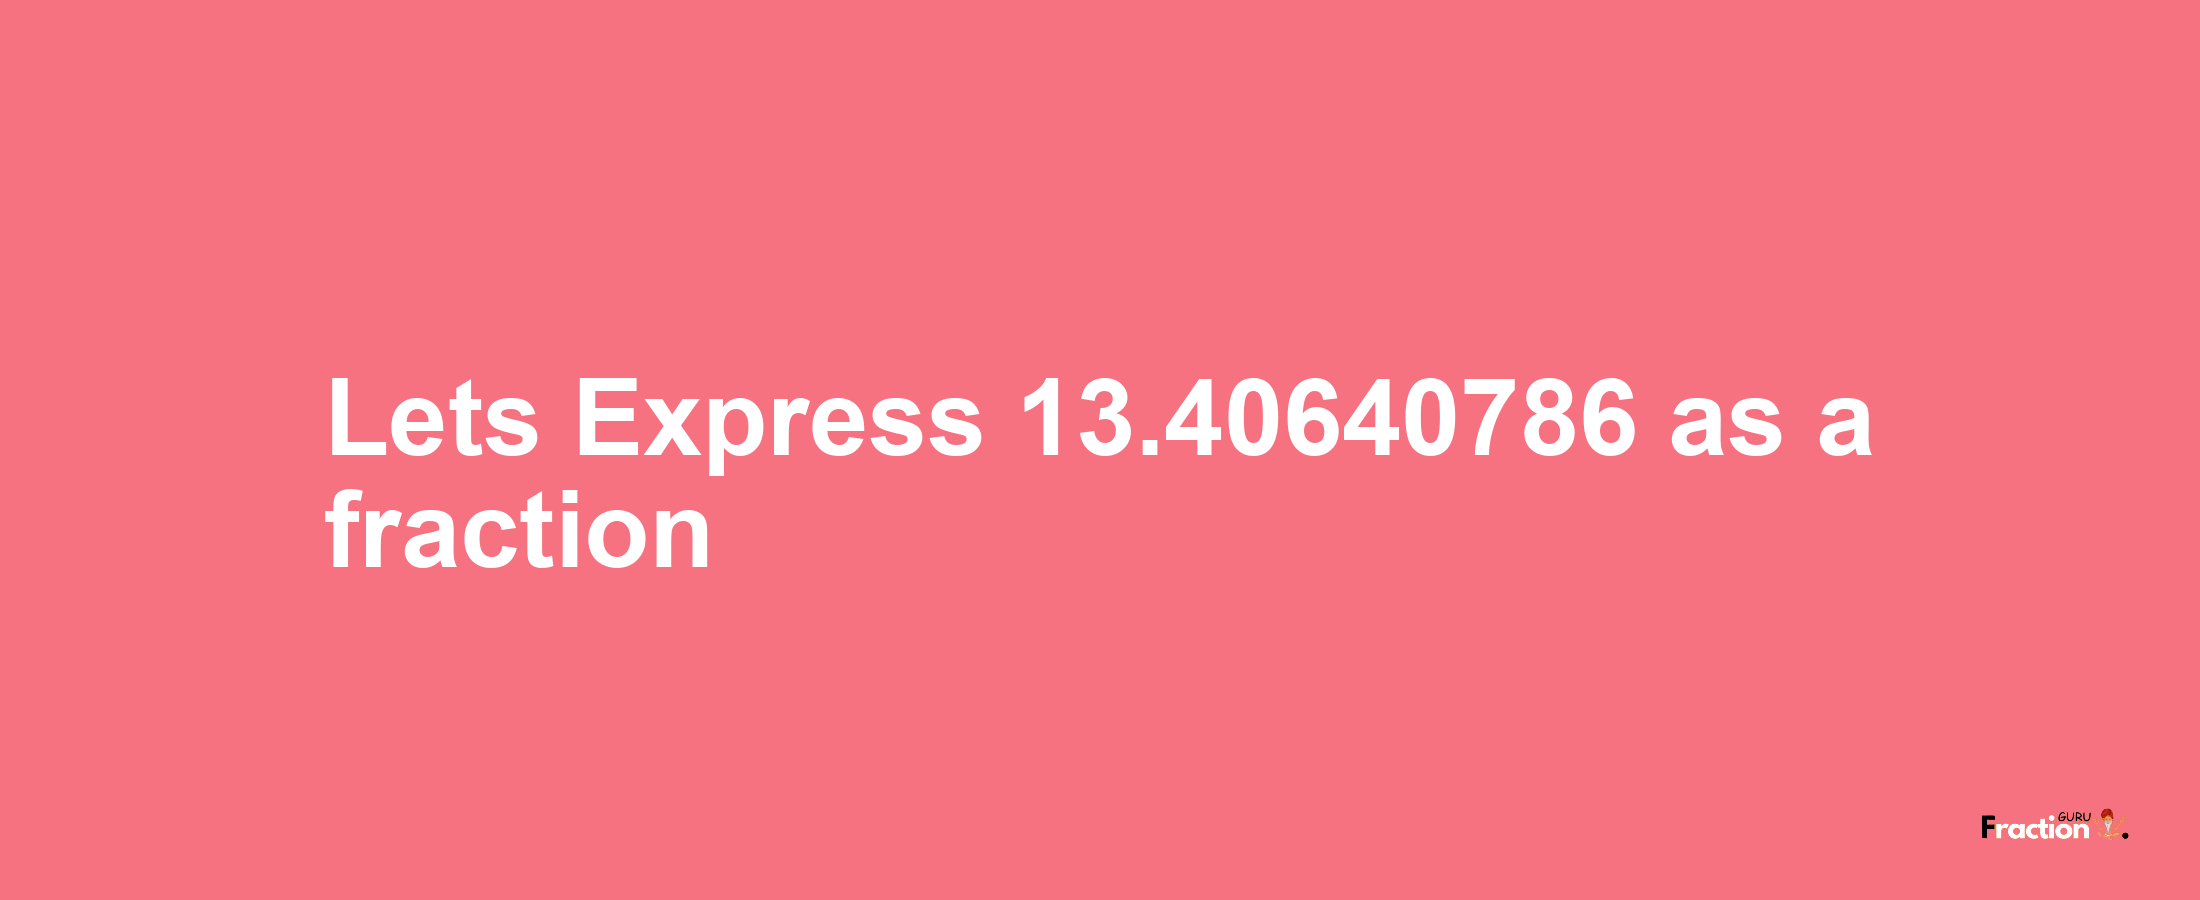 Lets Express 13.40640786 as afraction